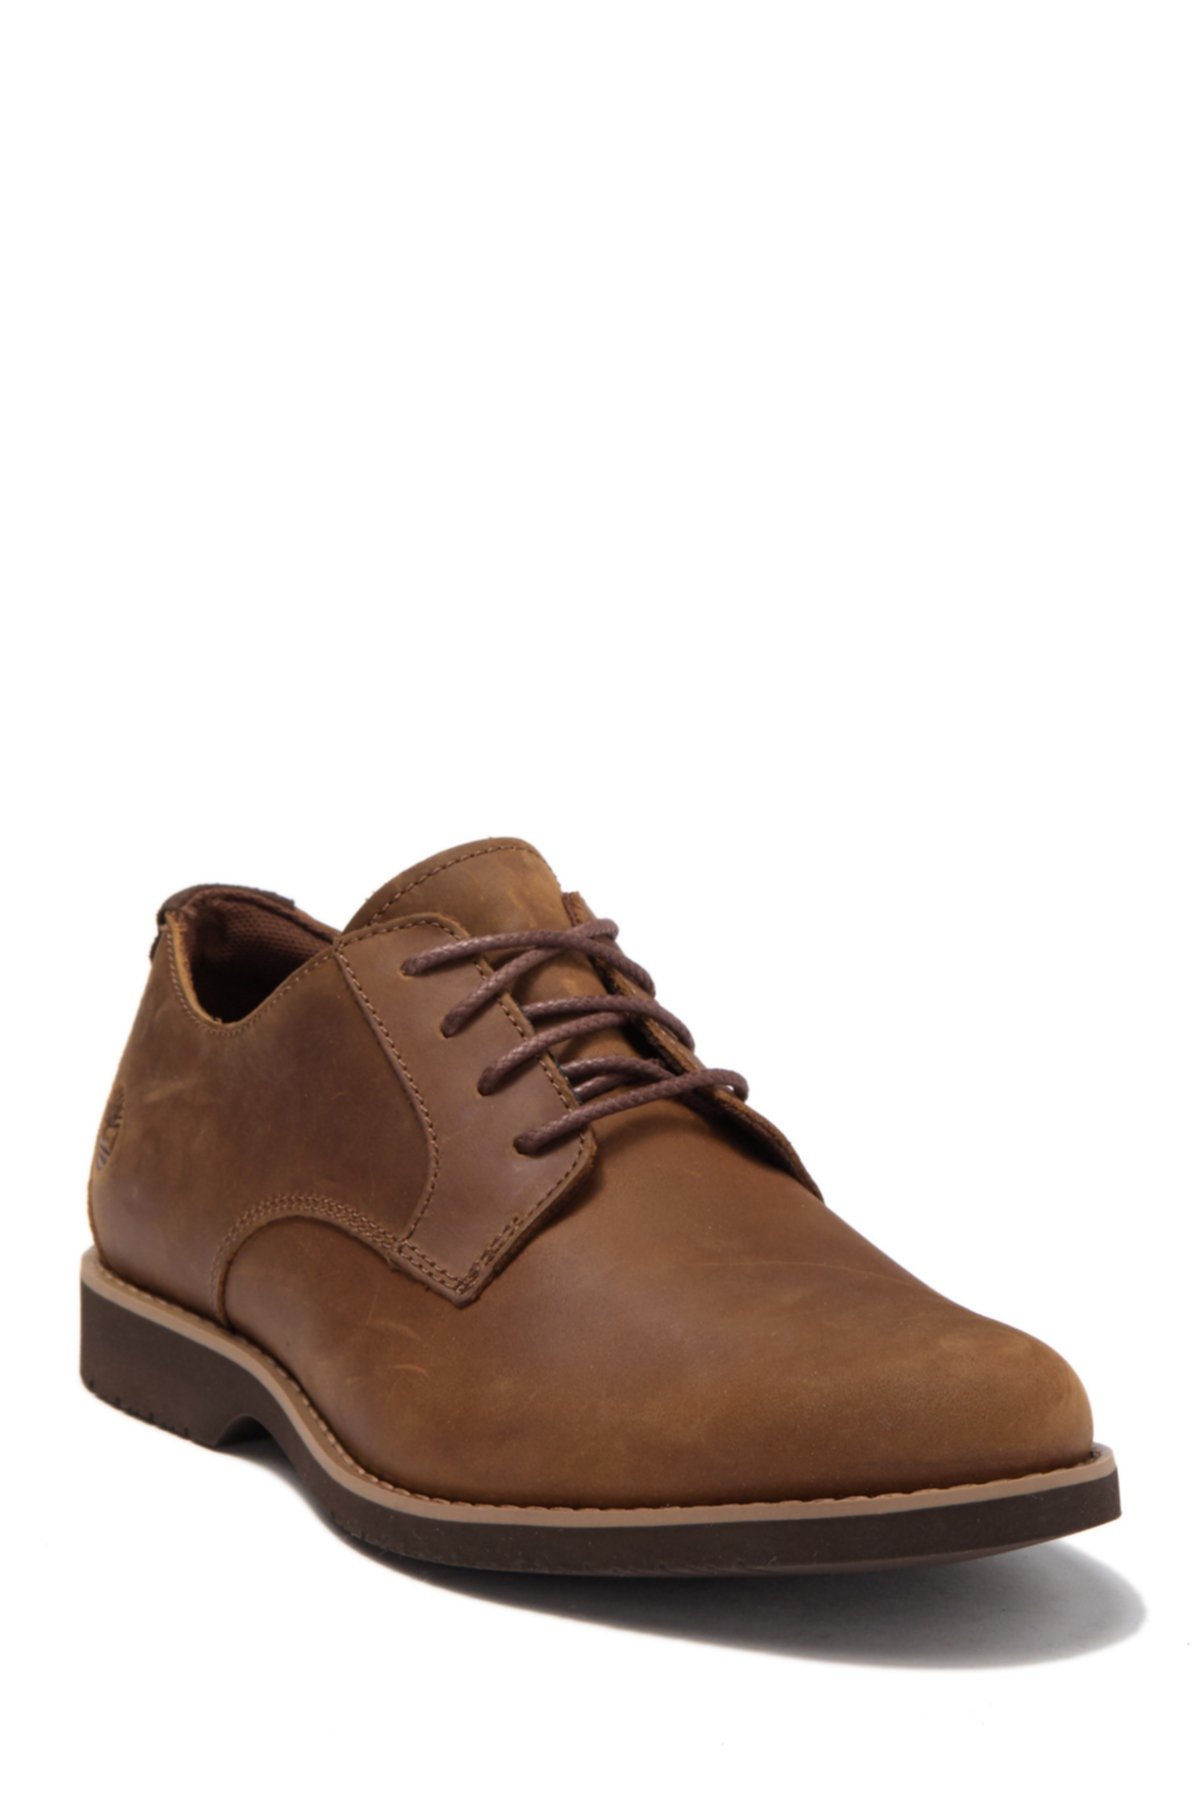 Woodhull Leather Oxford Timberland